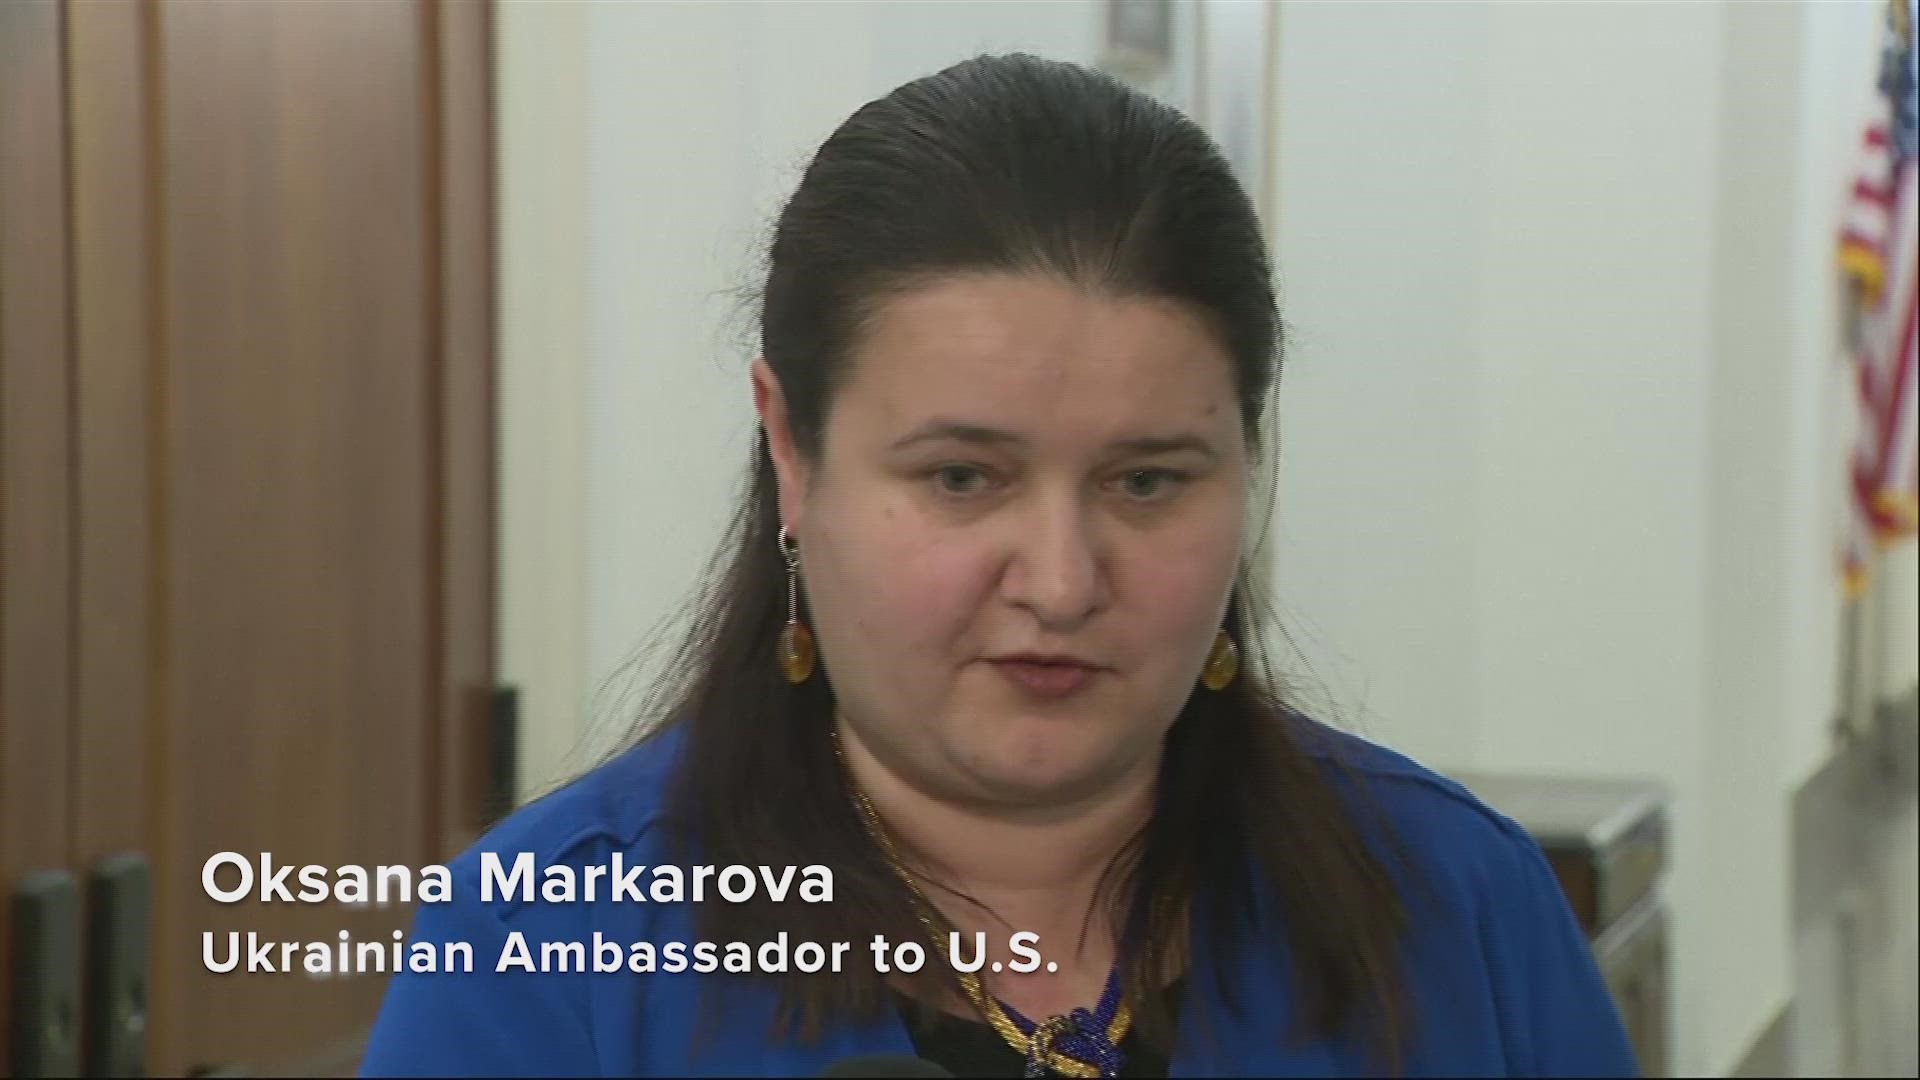 Ukrainian ambassador to the U.S. Oksana Markarova said her country is defending itself against Russia, but needs support from the world.